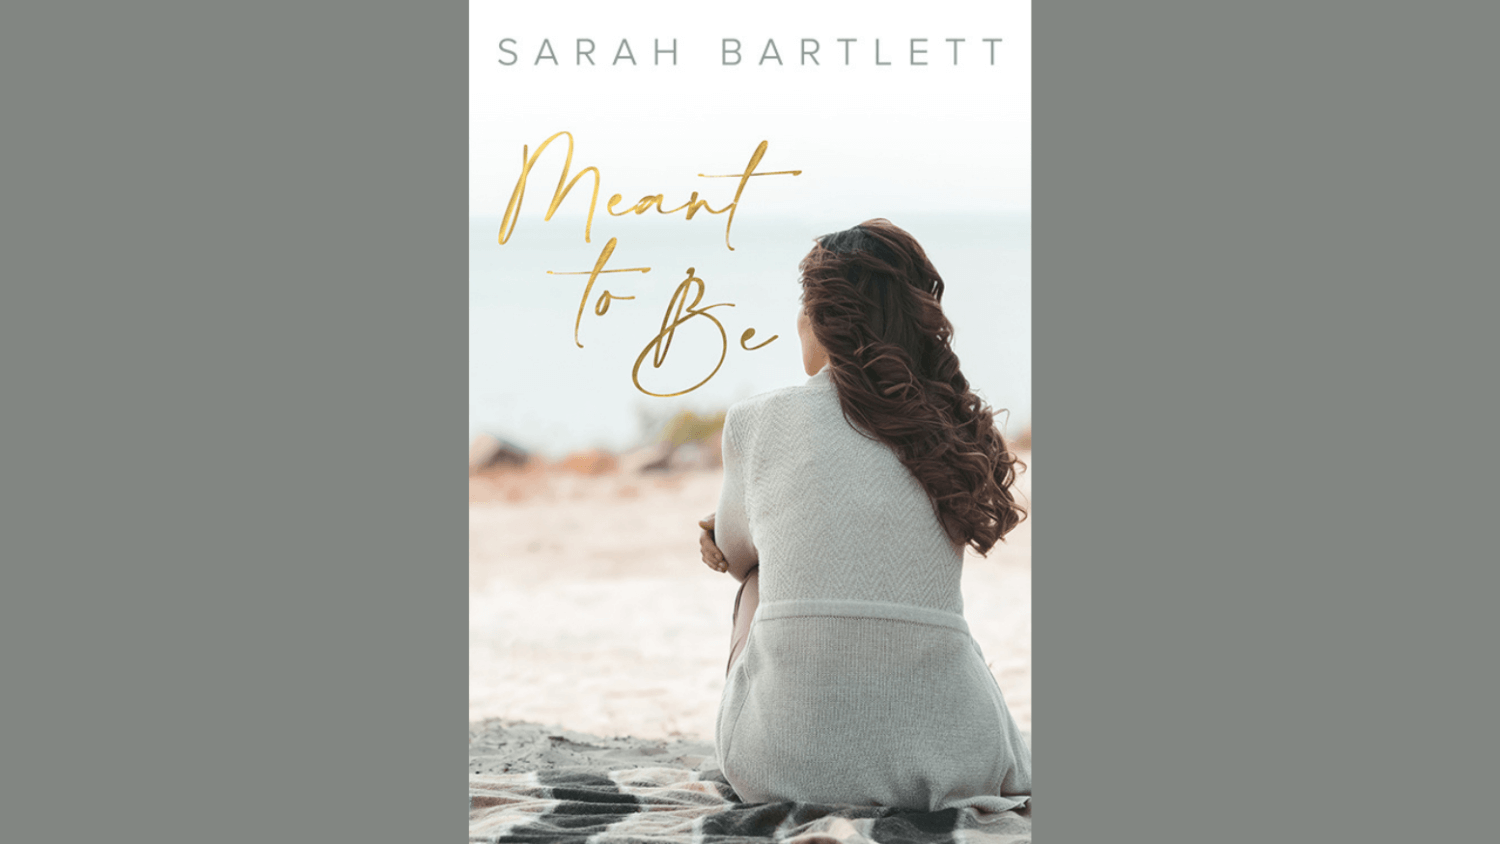 Former Condobolin Public School teacher Sarah Bartlett has publisher her first novel ‘Meant to Be’. It features some of Condobolin’s known sites and the characters also reflect the kind-hearted spirit of the Condo locals. Image Credit: www.arkhousepress.com